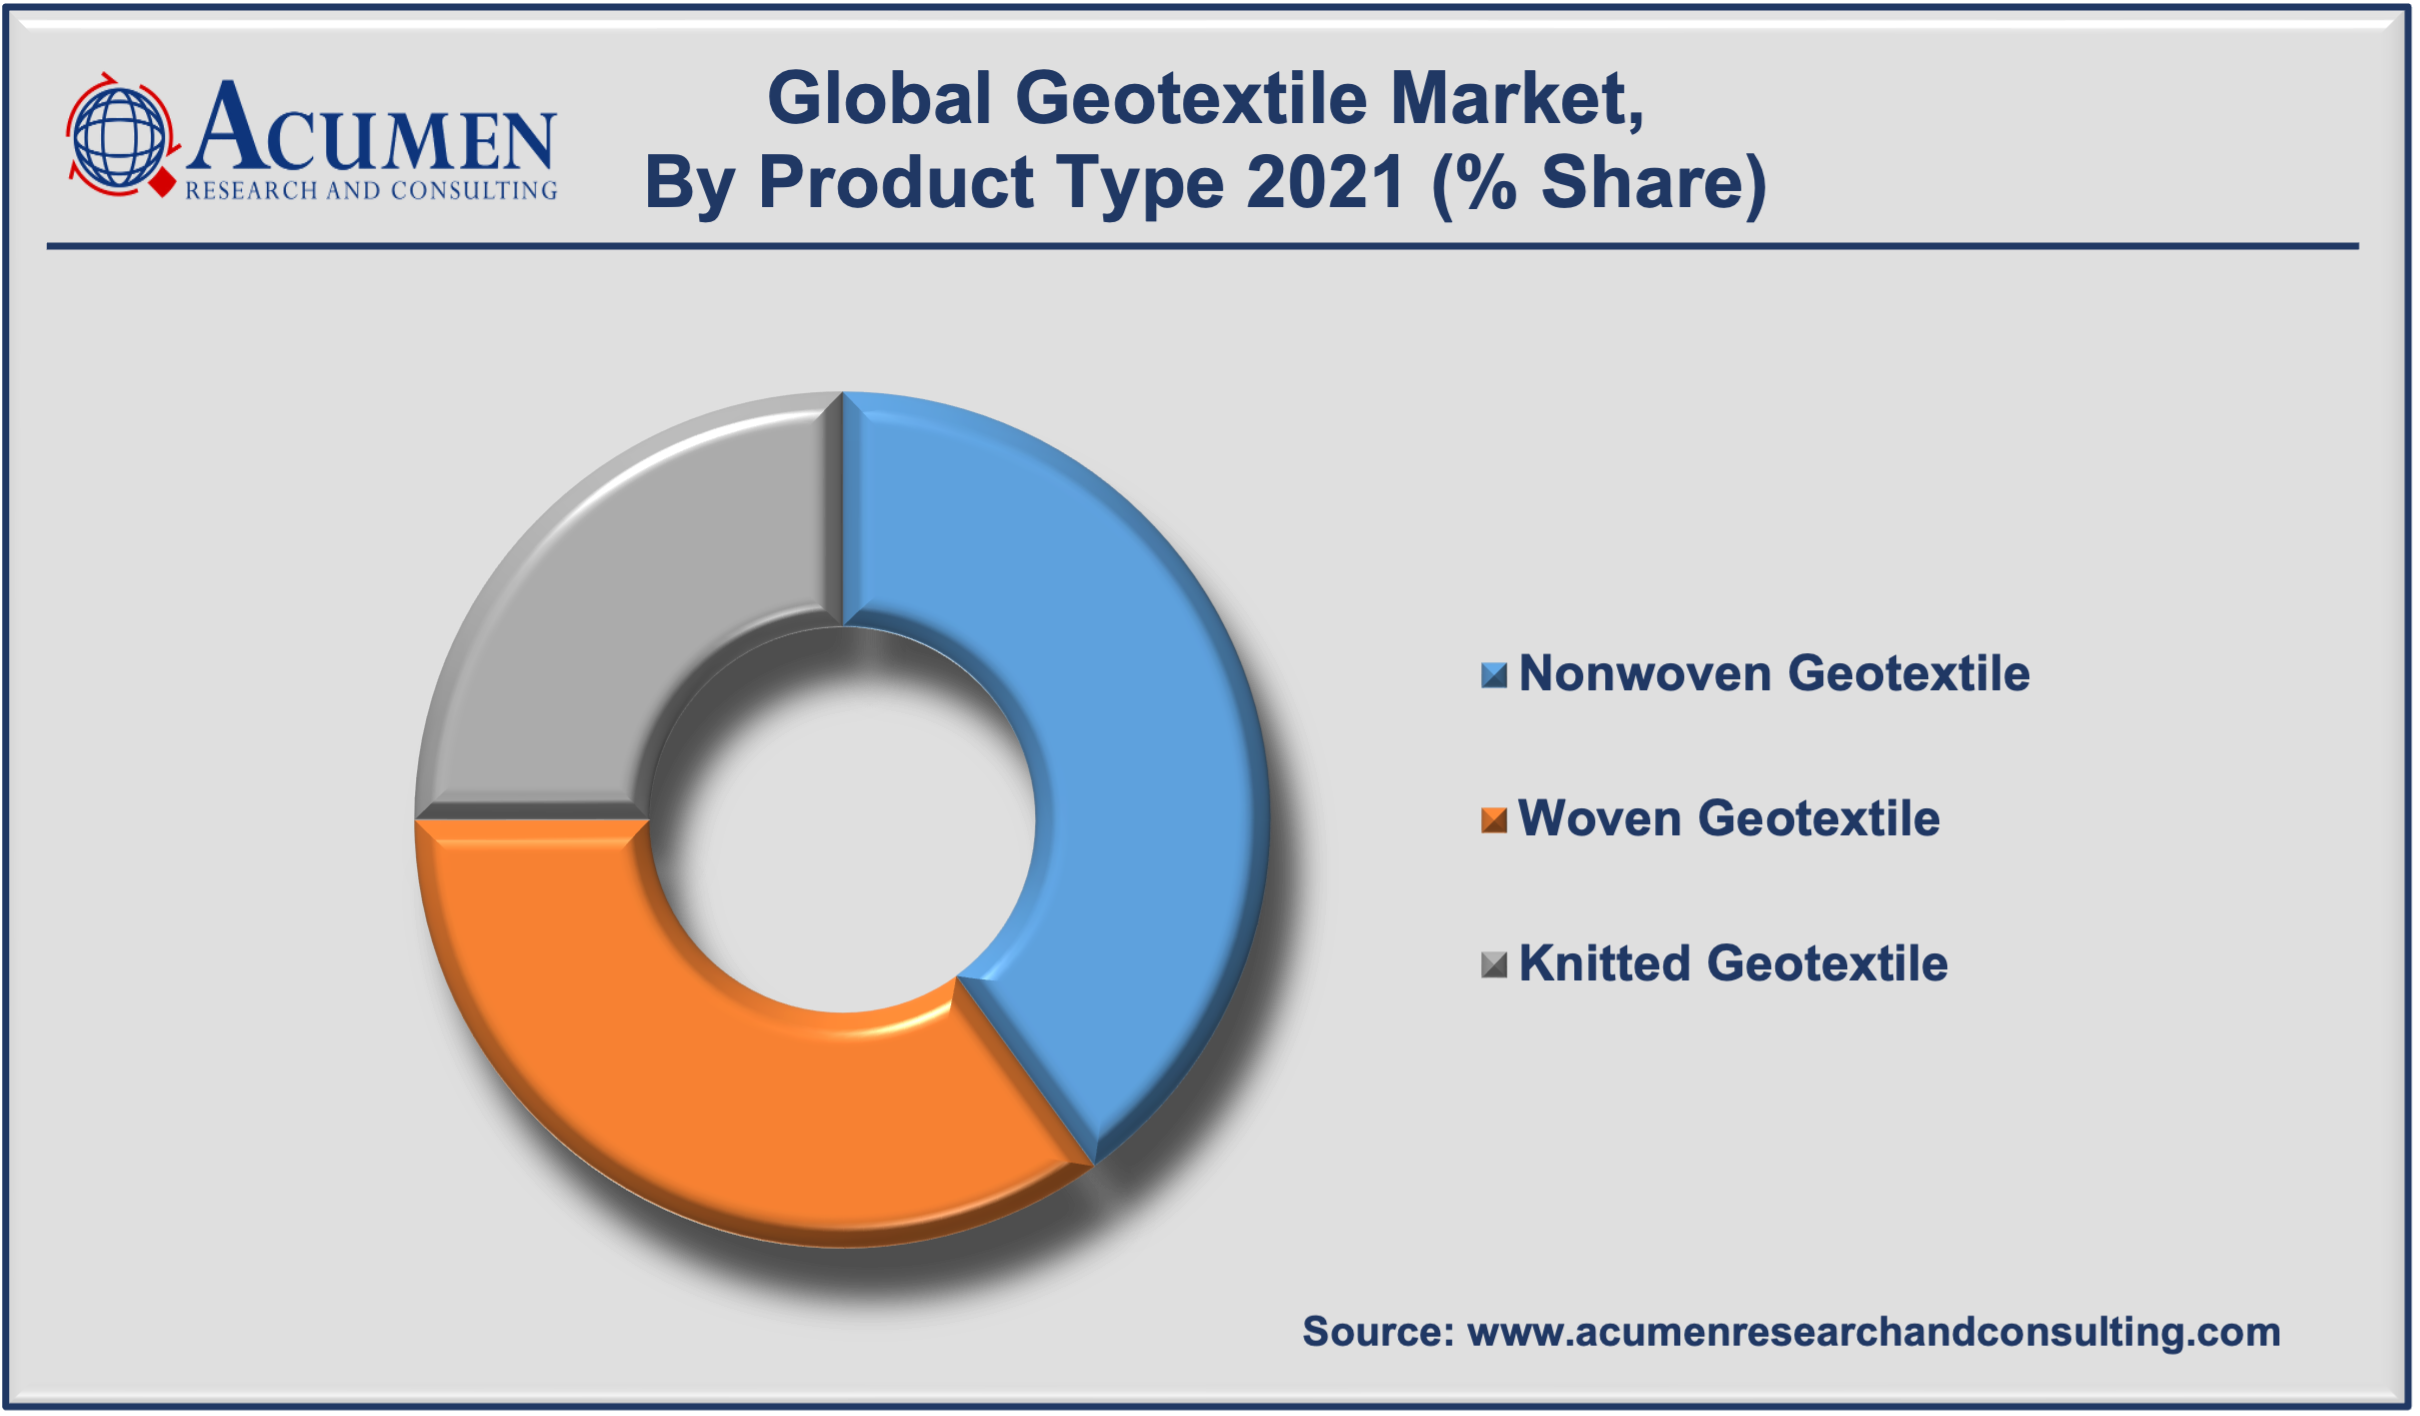 Geotextile Market Share accounted for USD 7,028 Mn in 2021 and is expected to reach the value of USD 12,030 Million by 2030 growing at a CAGR of 6.3% during the forecast period from 2022 to 2030.